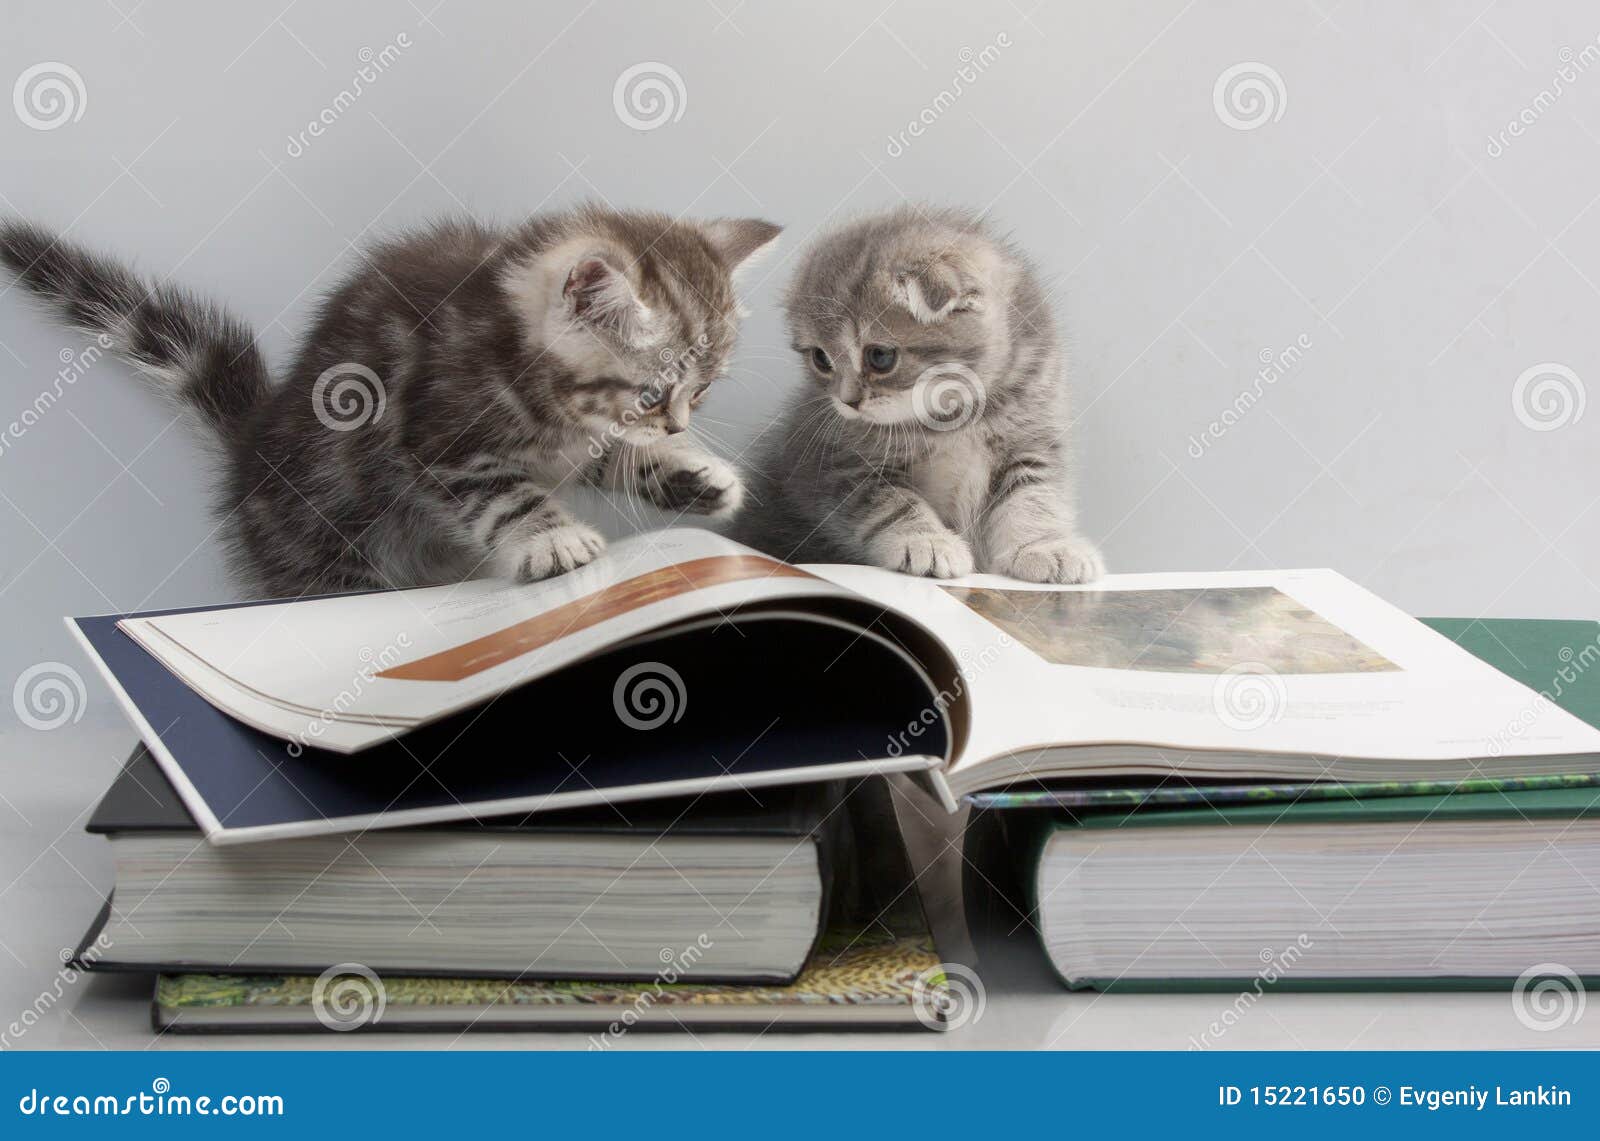 two kittens are considering a book